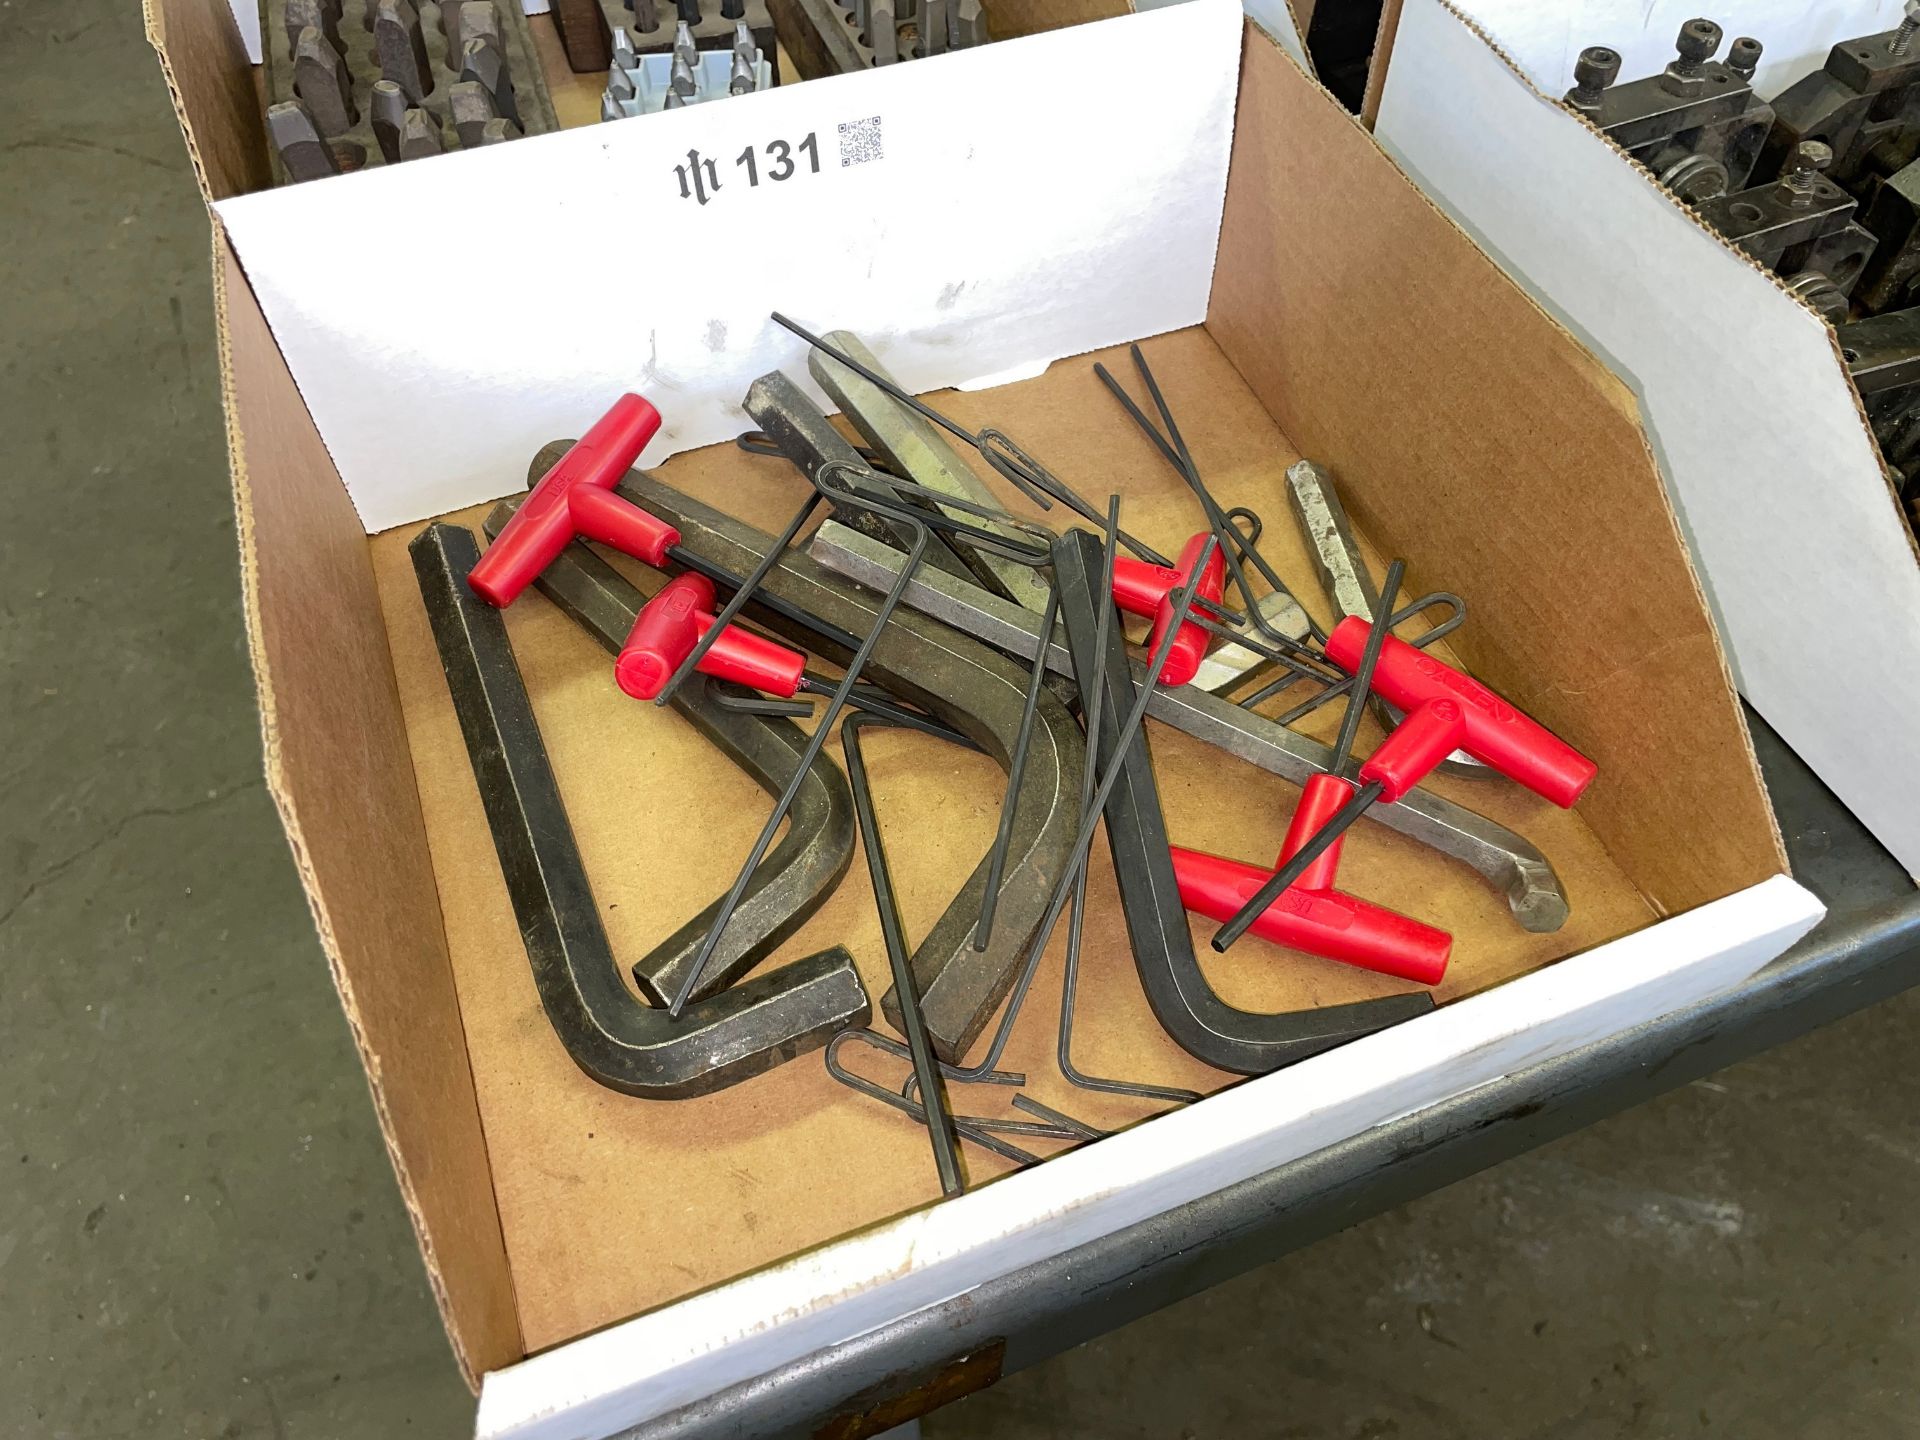 Lot with Various Allen Wrenches